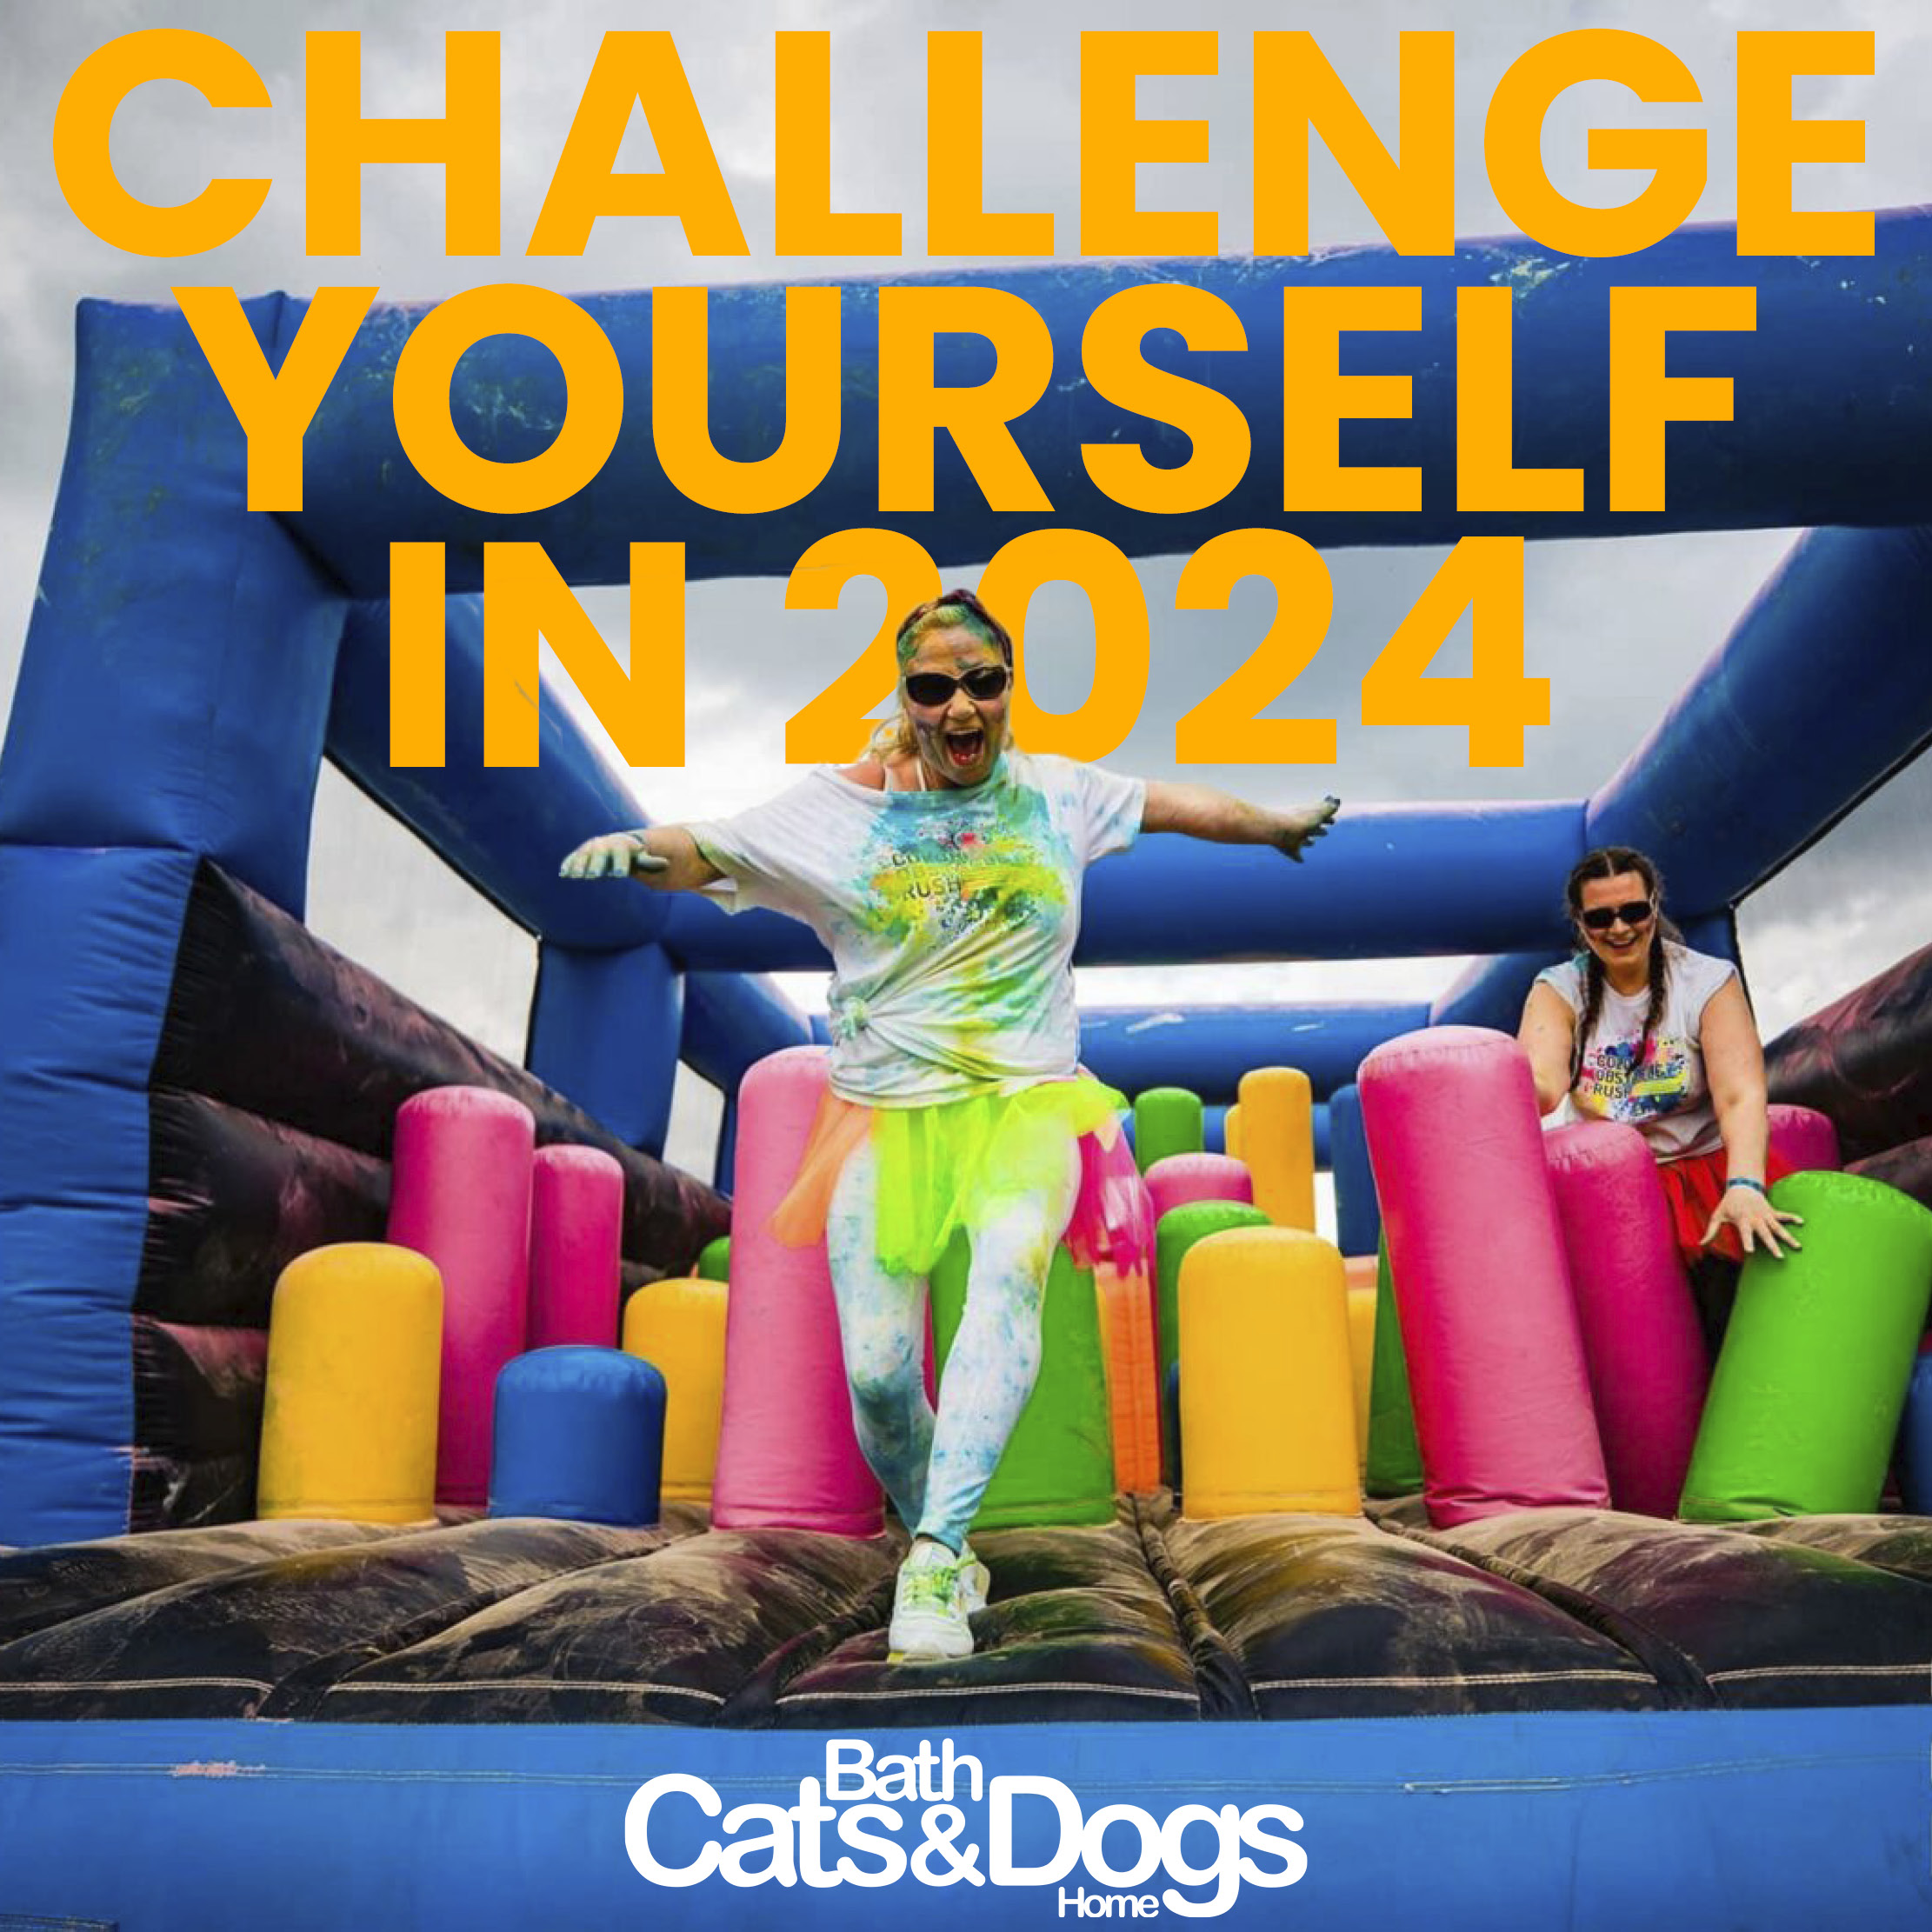 Challenge yourself in 2024 with a photo from the Color Obstacle Rush event 